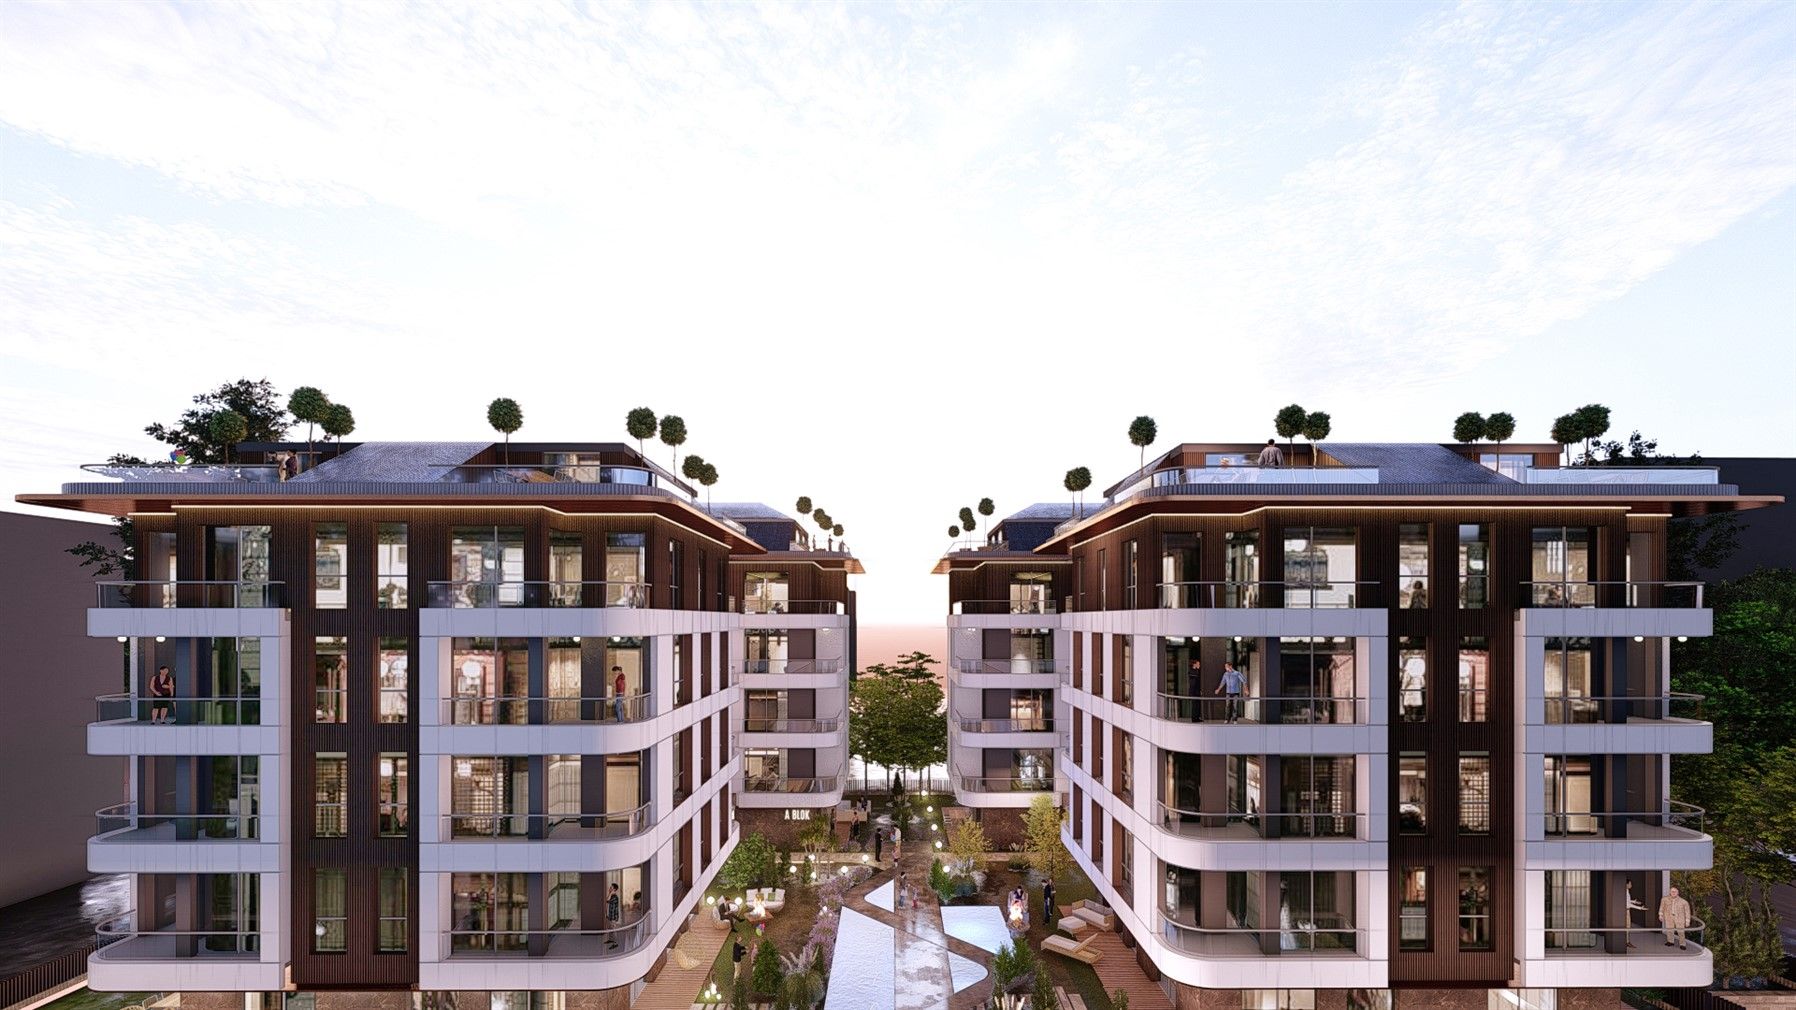 Modern project in one of the most prestigious district of the city